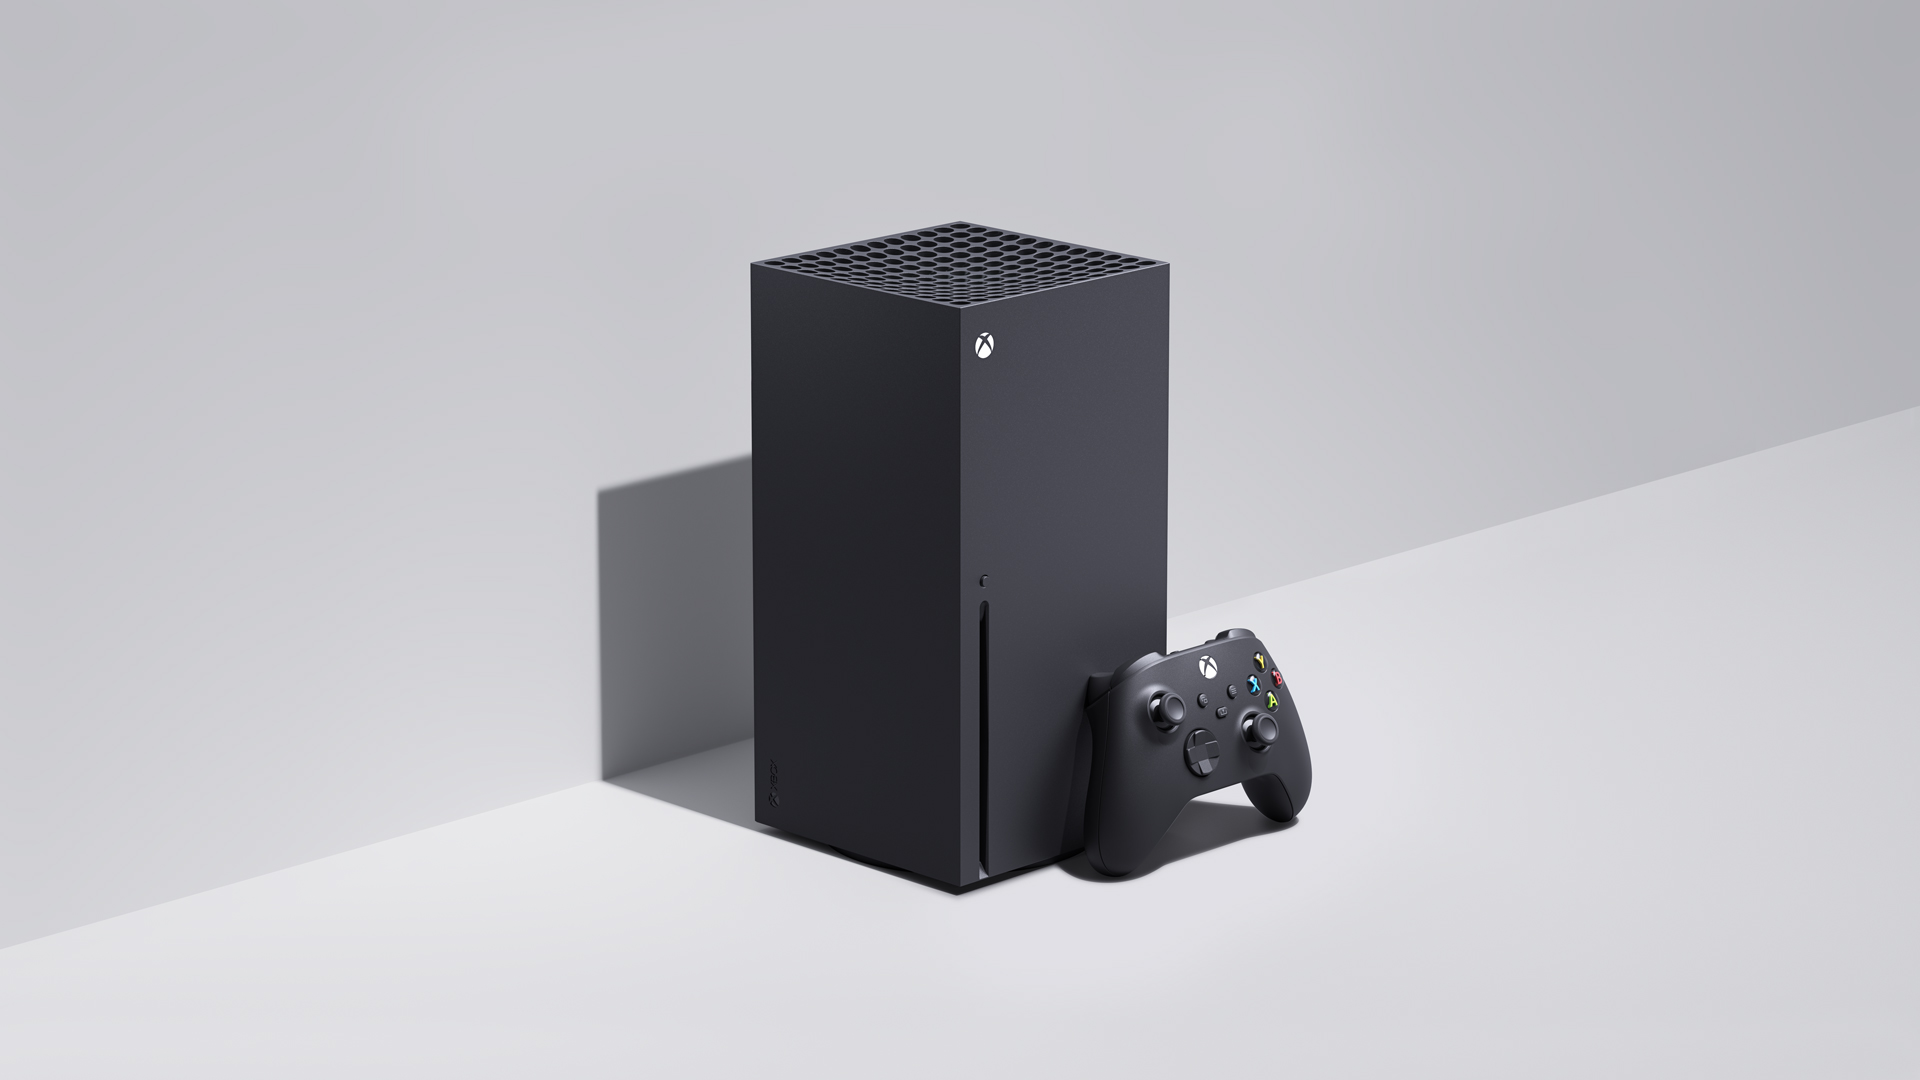 Xbox Series X and Xbox Series S: Designing the Next Generation of